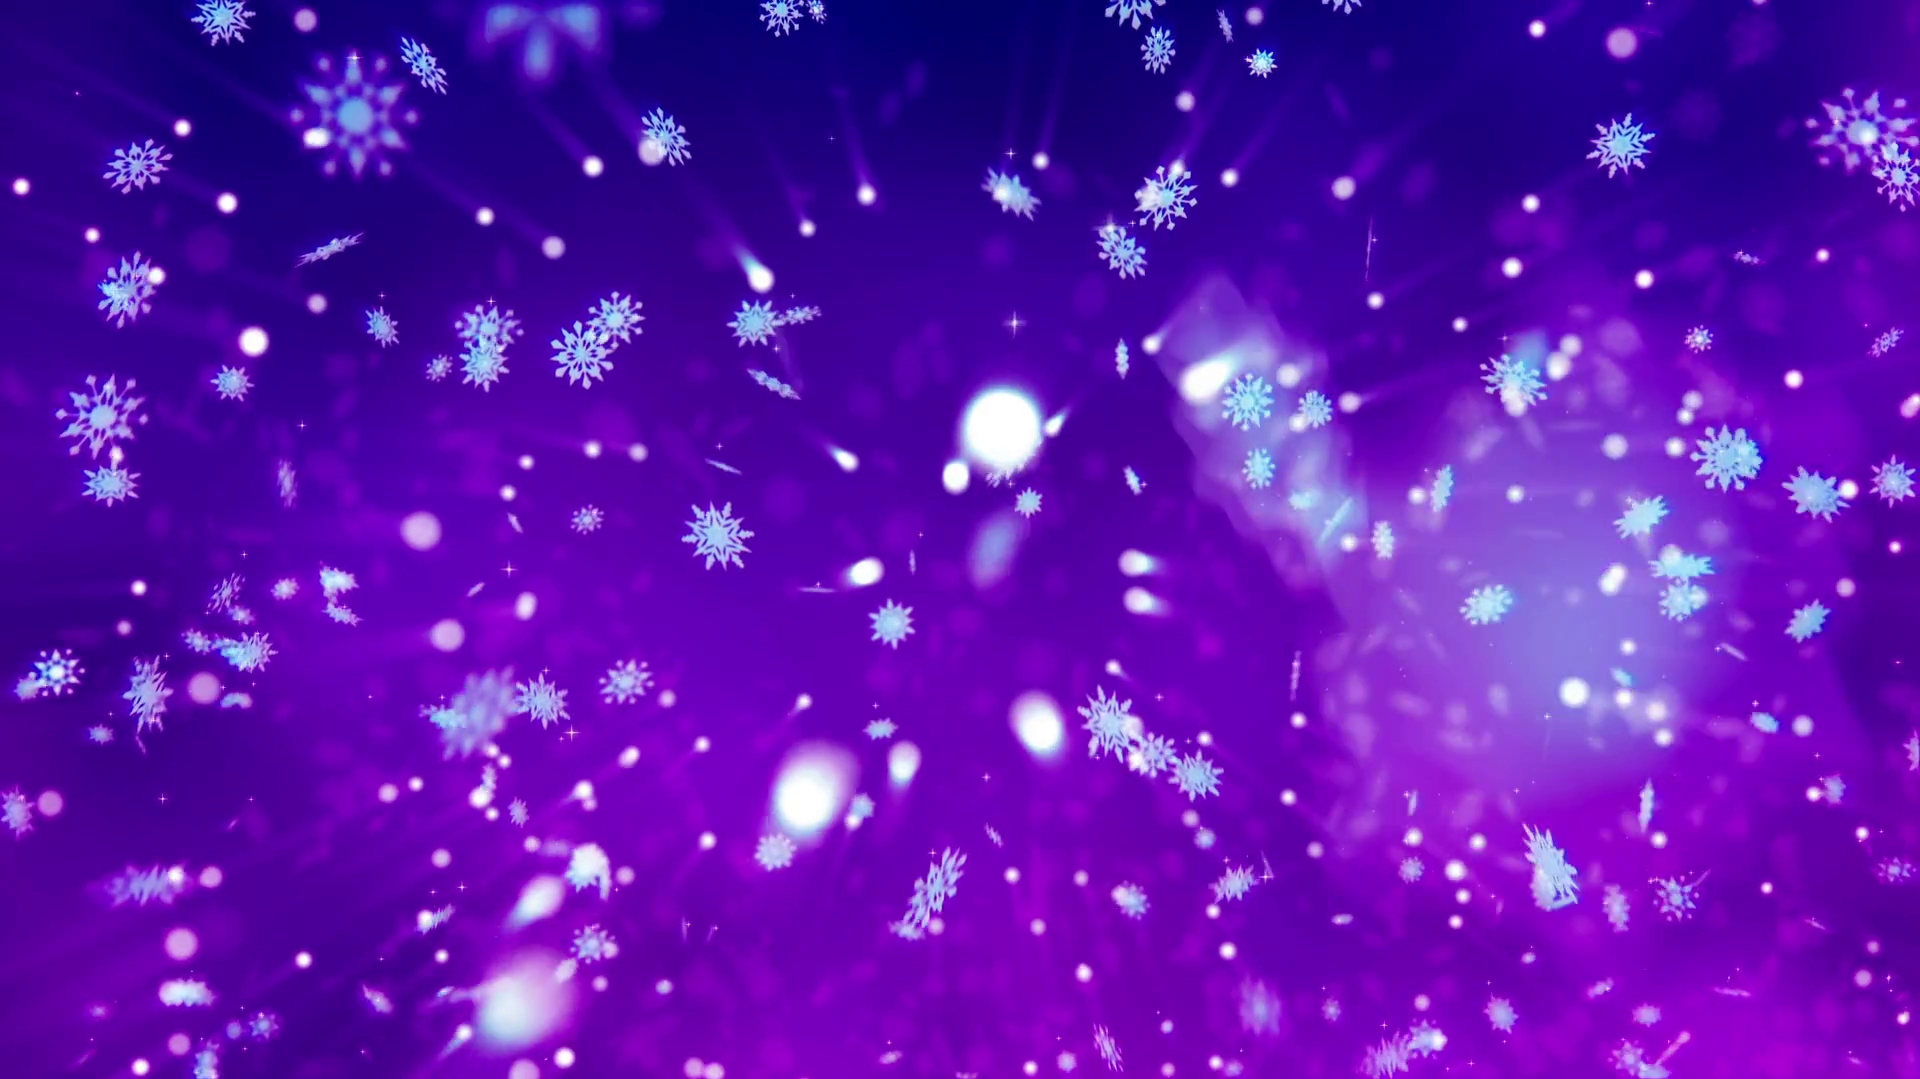 Snow Flakes Slowly Drop Down On A Violet Background Happy New